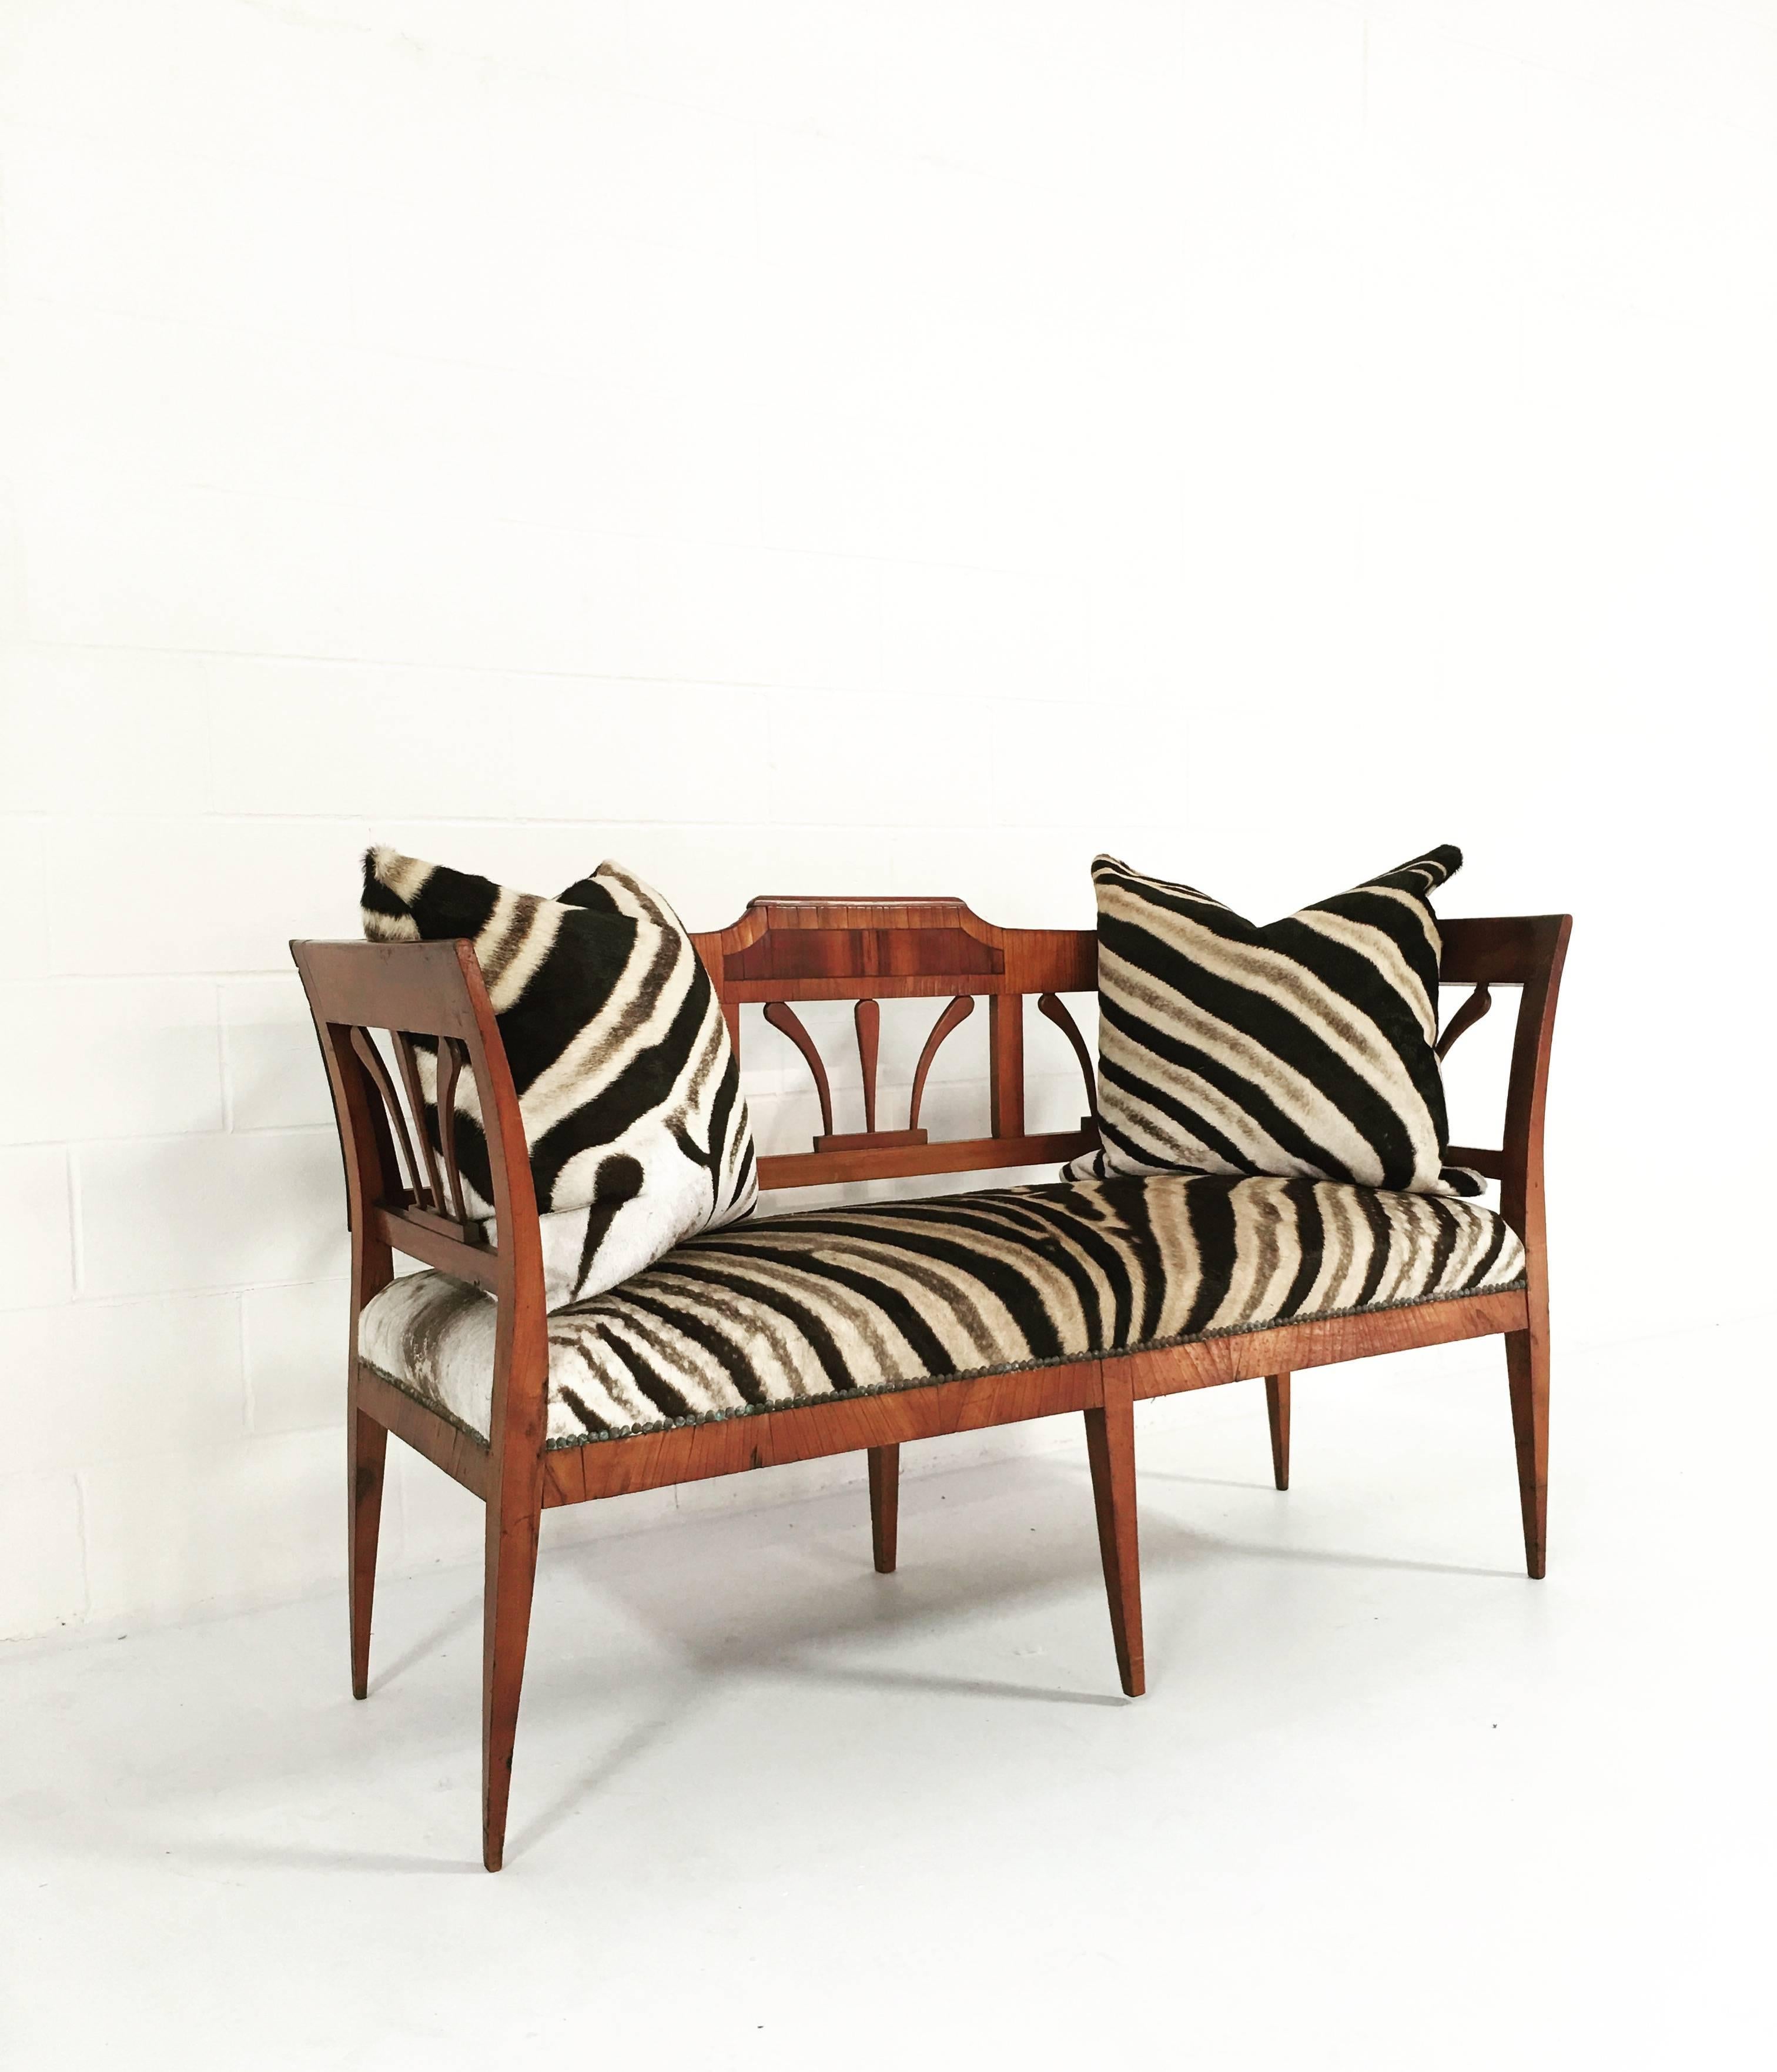 Sophistication radiates from this beautiful 19th century settee. The delicate lines of the piece are what set it apart. We designed two 24-inch down-filled, double-sided zebra hide pillows for an inviting feeling of high style and luxury. It is